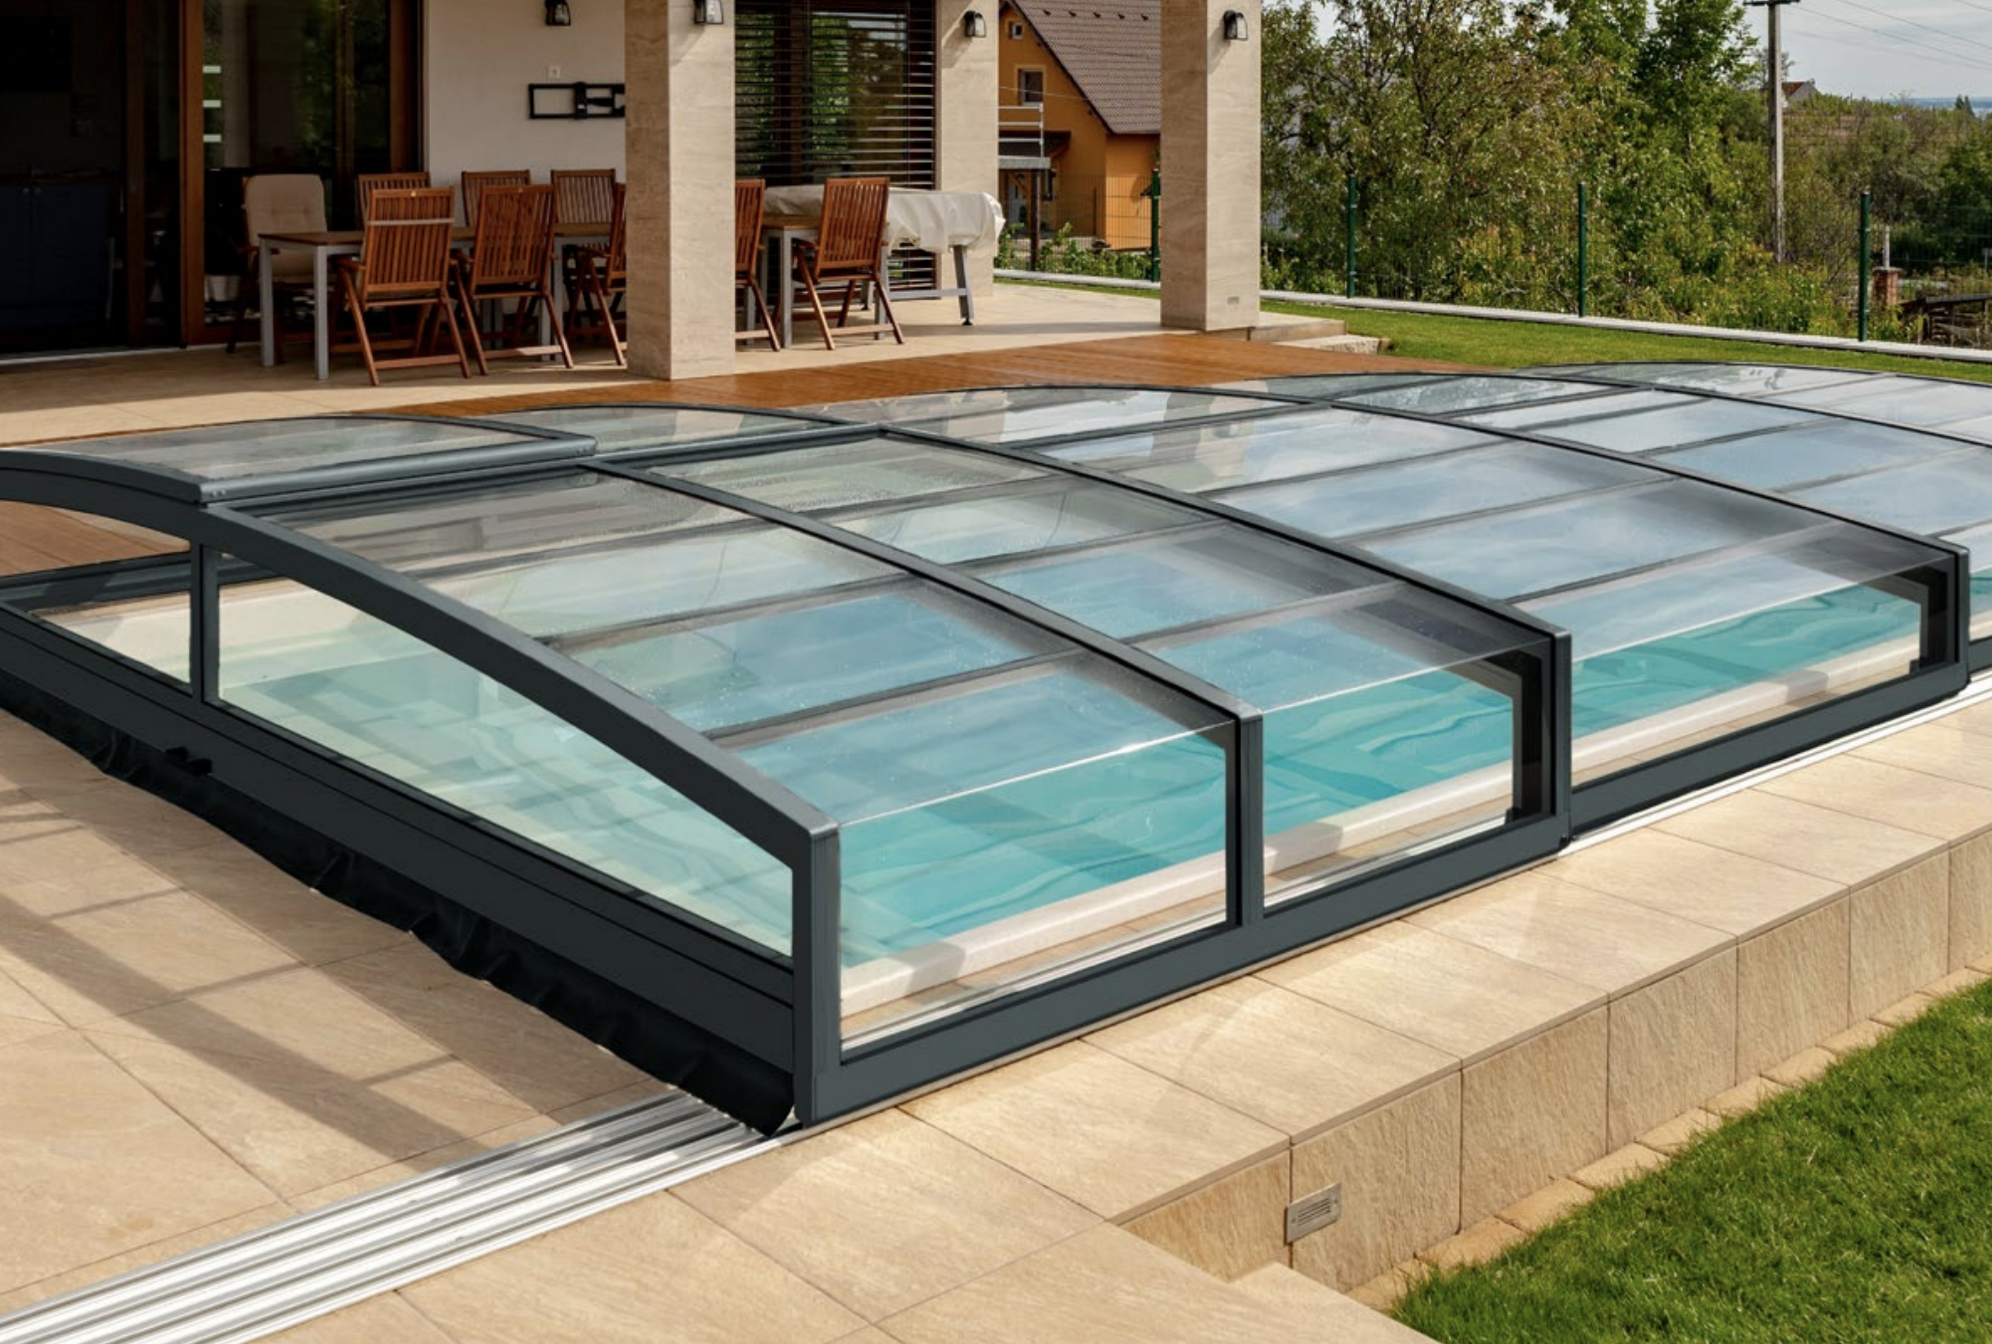 Poolshelter ONE swimming pool enclosures